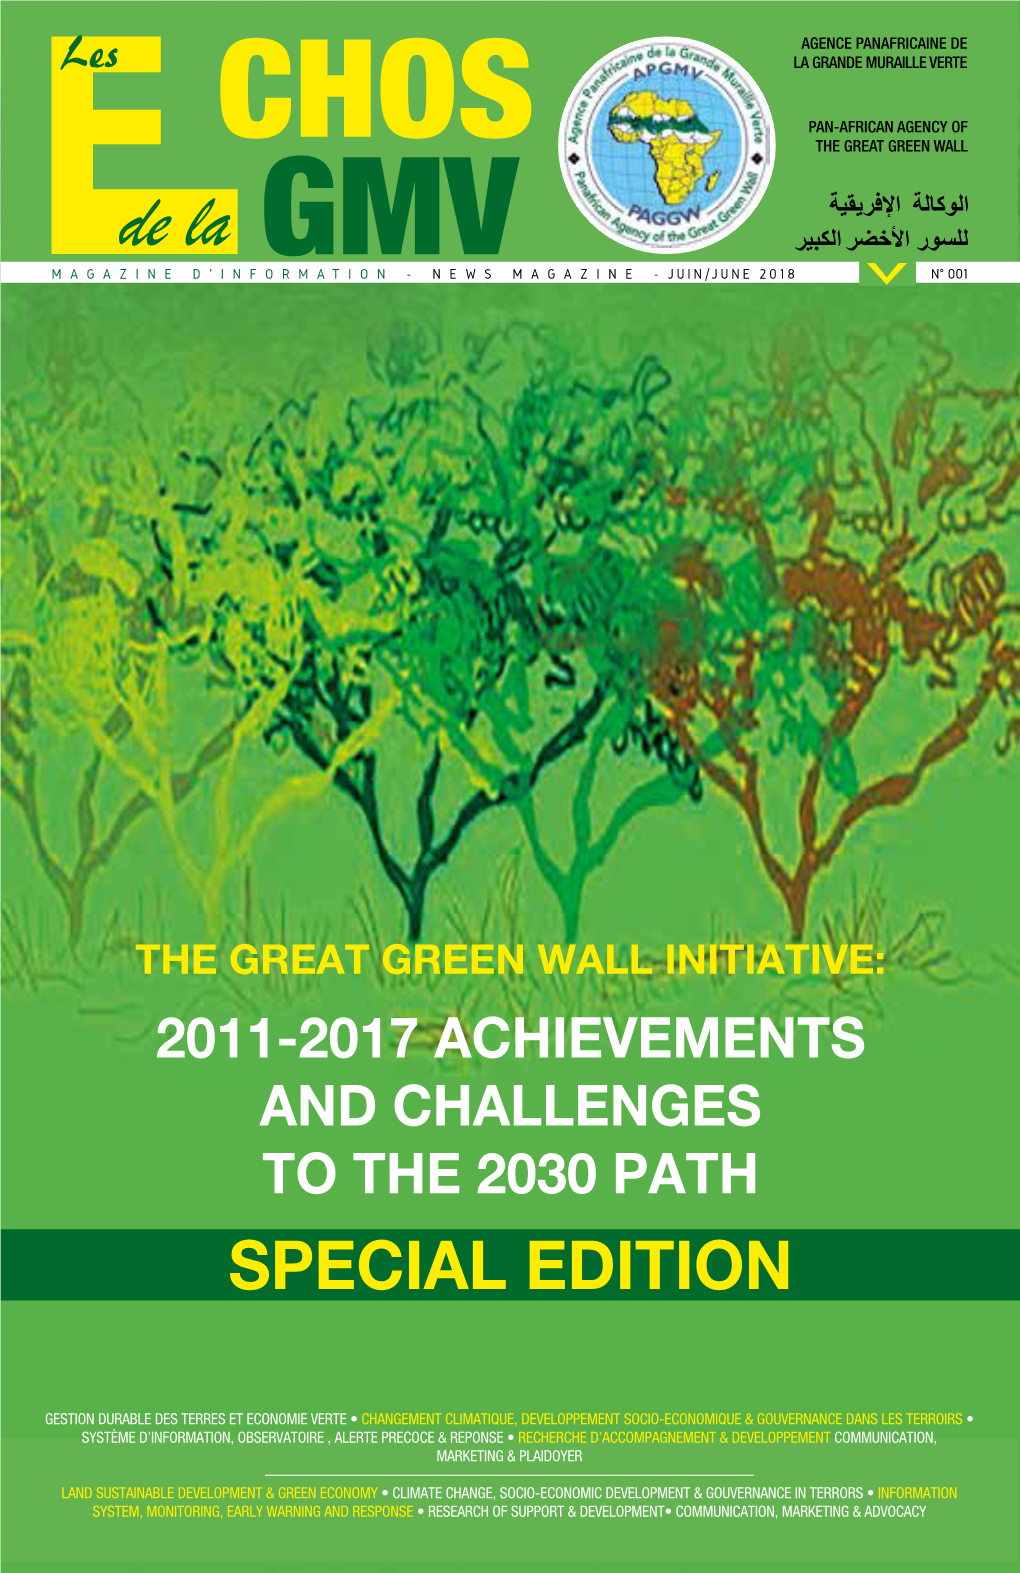 The Great Green Wall Initiative: 2011-2017 Achievements and Challenges to the 2030 Path Special Edition